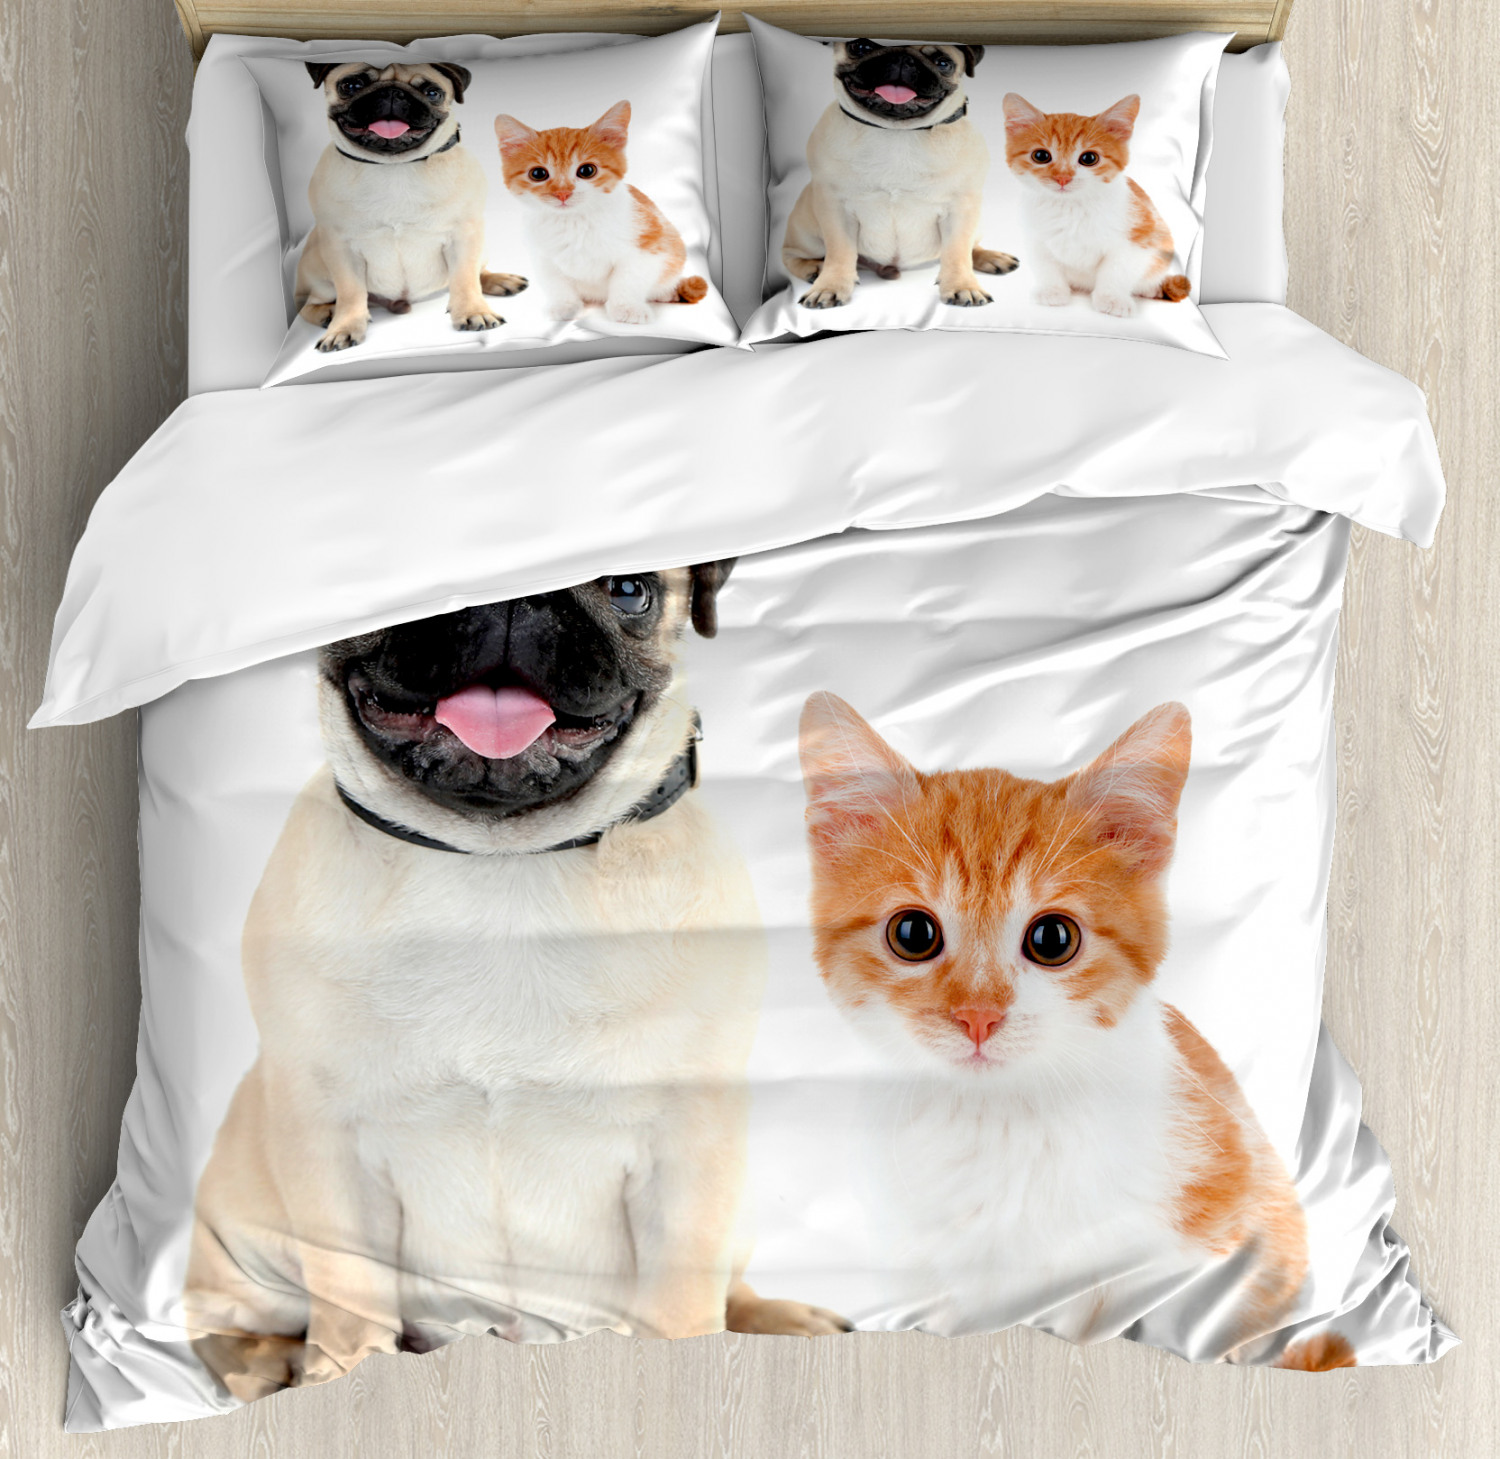 Pug Duvet Cover Set With Pillow Shams Kitten And Puppy Photo Print